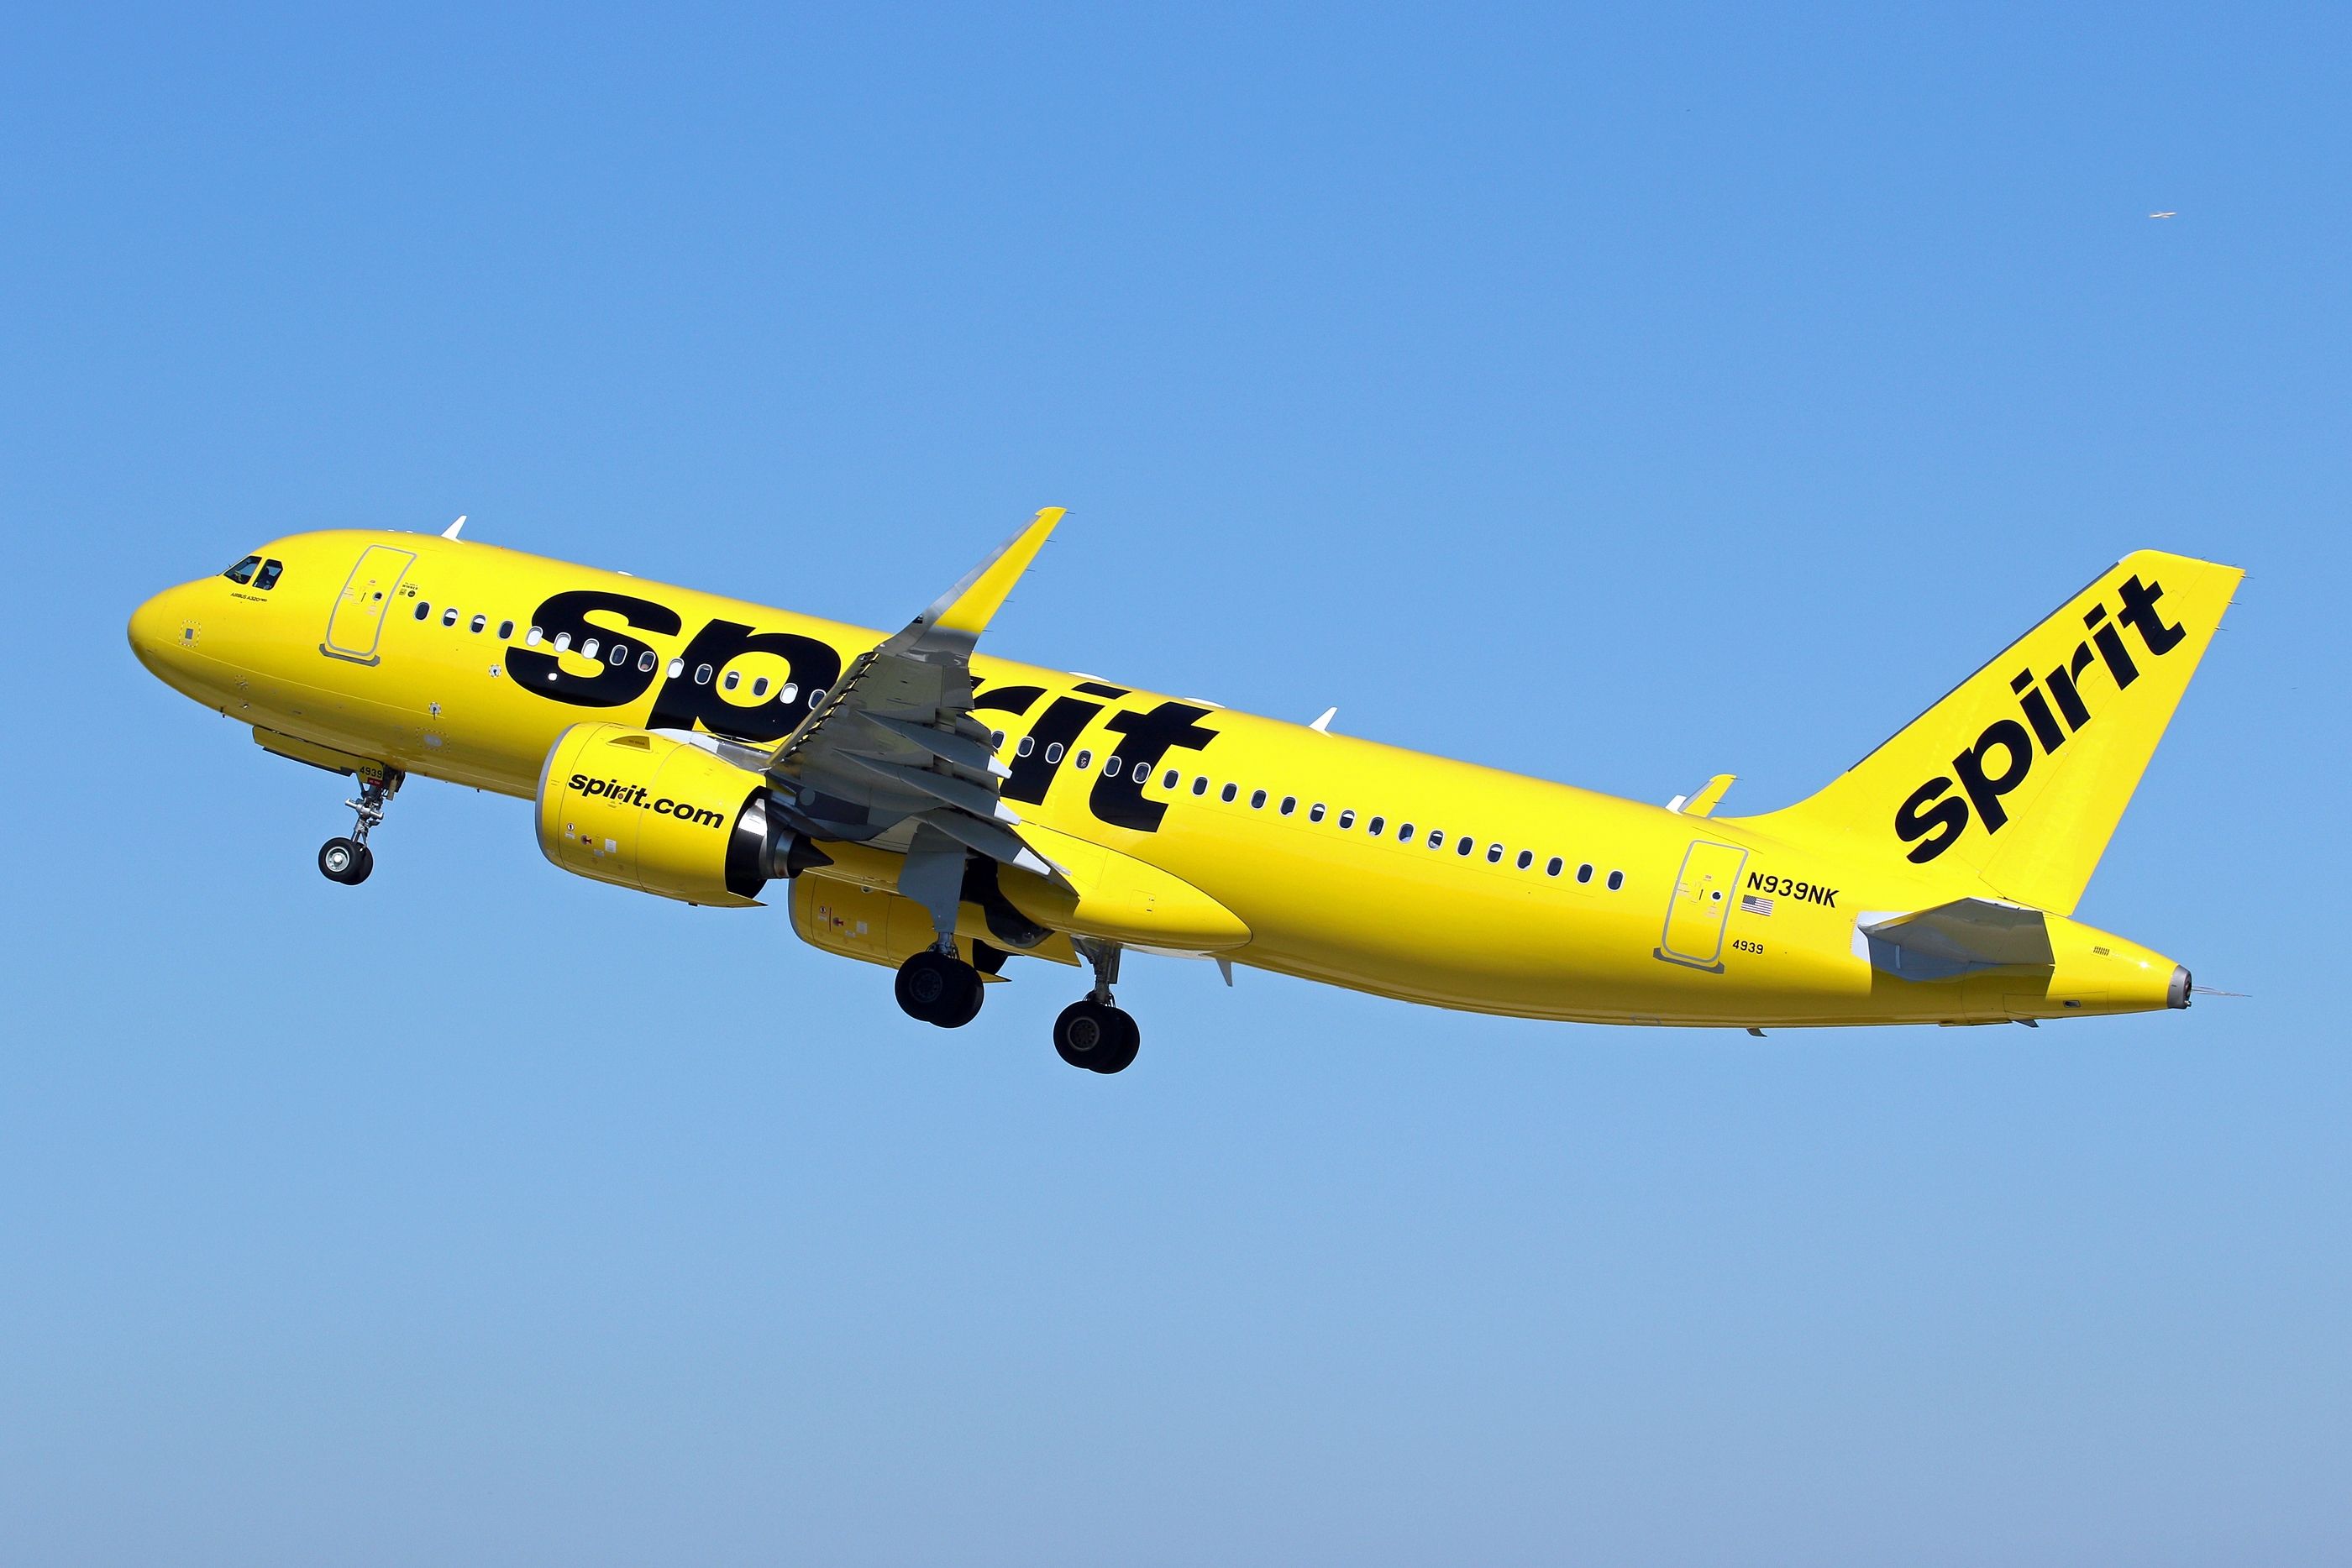 Spirit Airlines A320neo flying